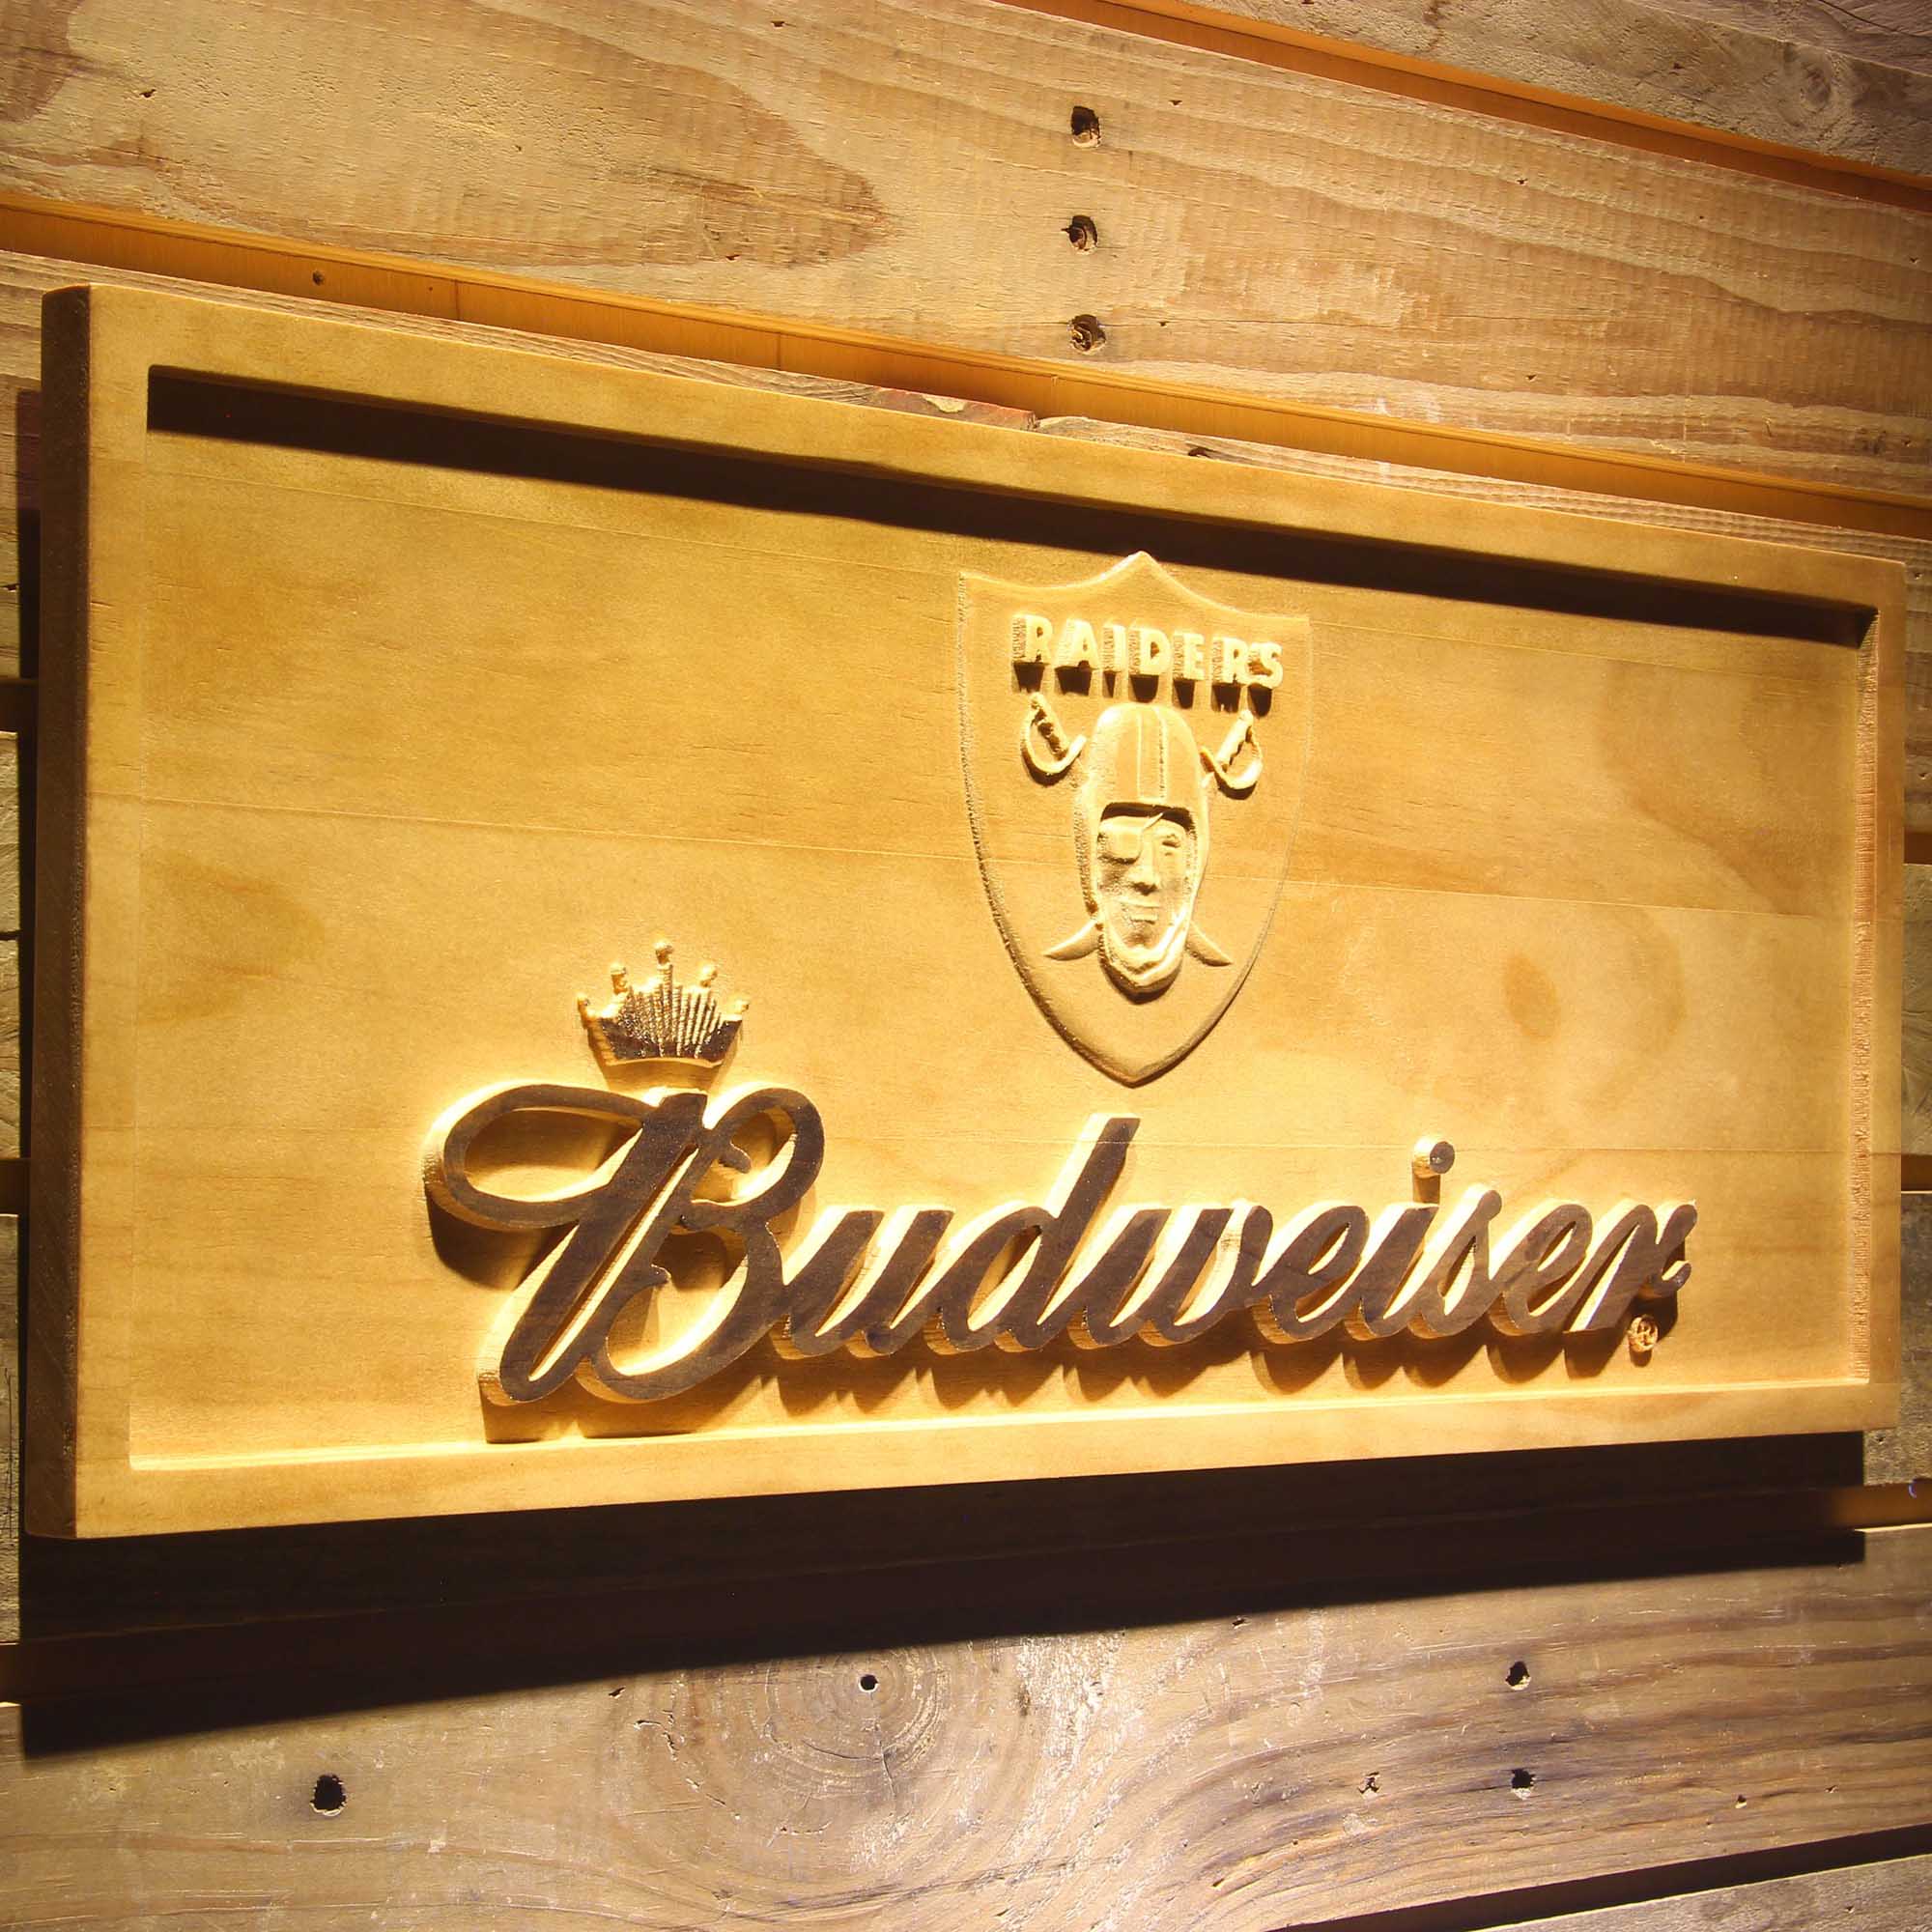 Oakland Raiders Budweiser 3D Solid Wooden Craving Sign